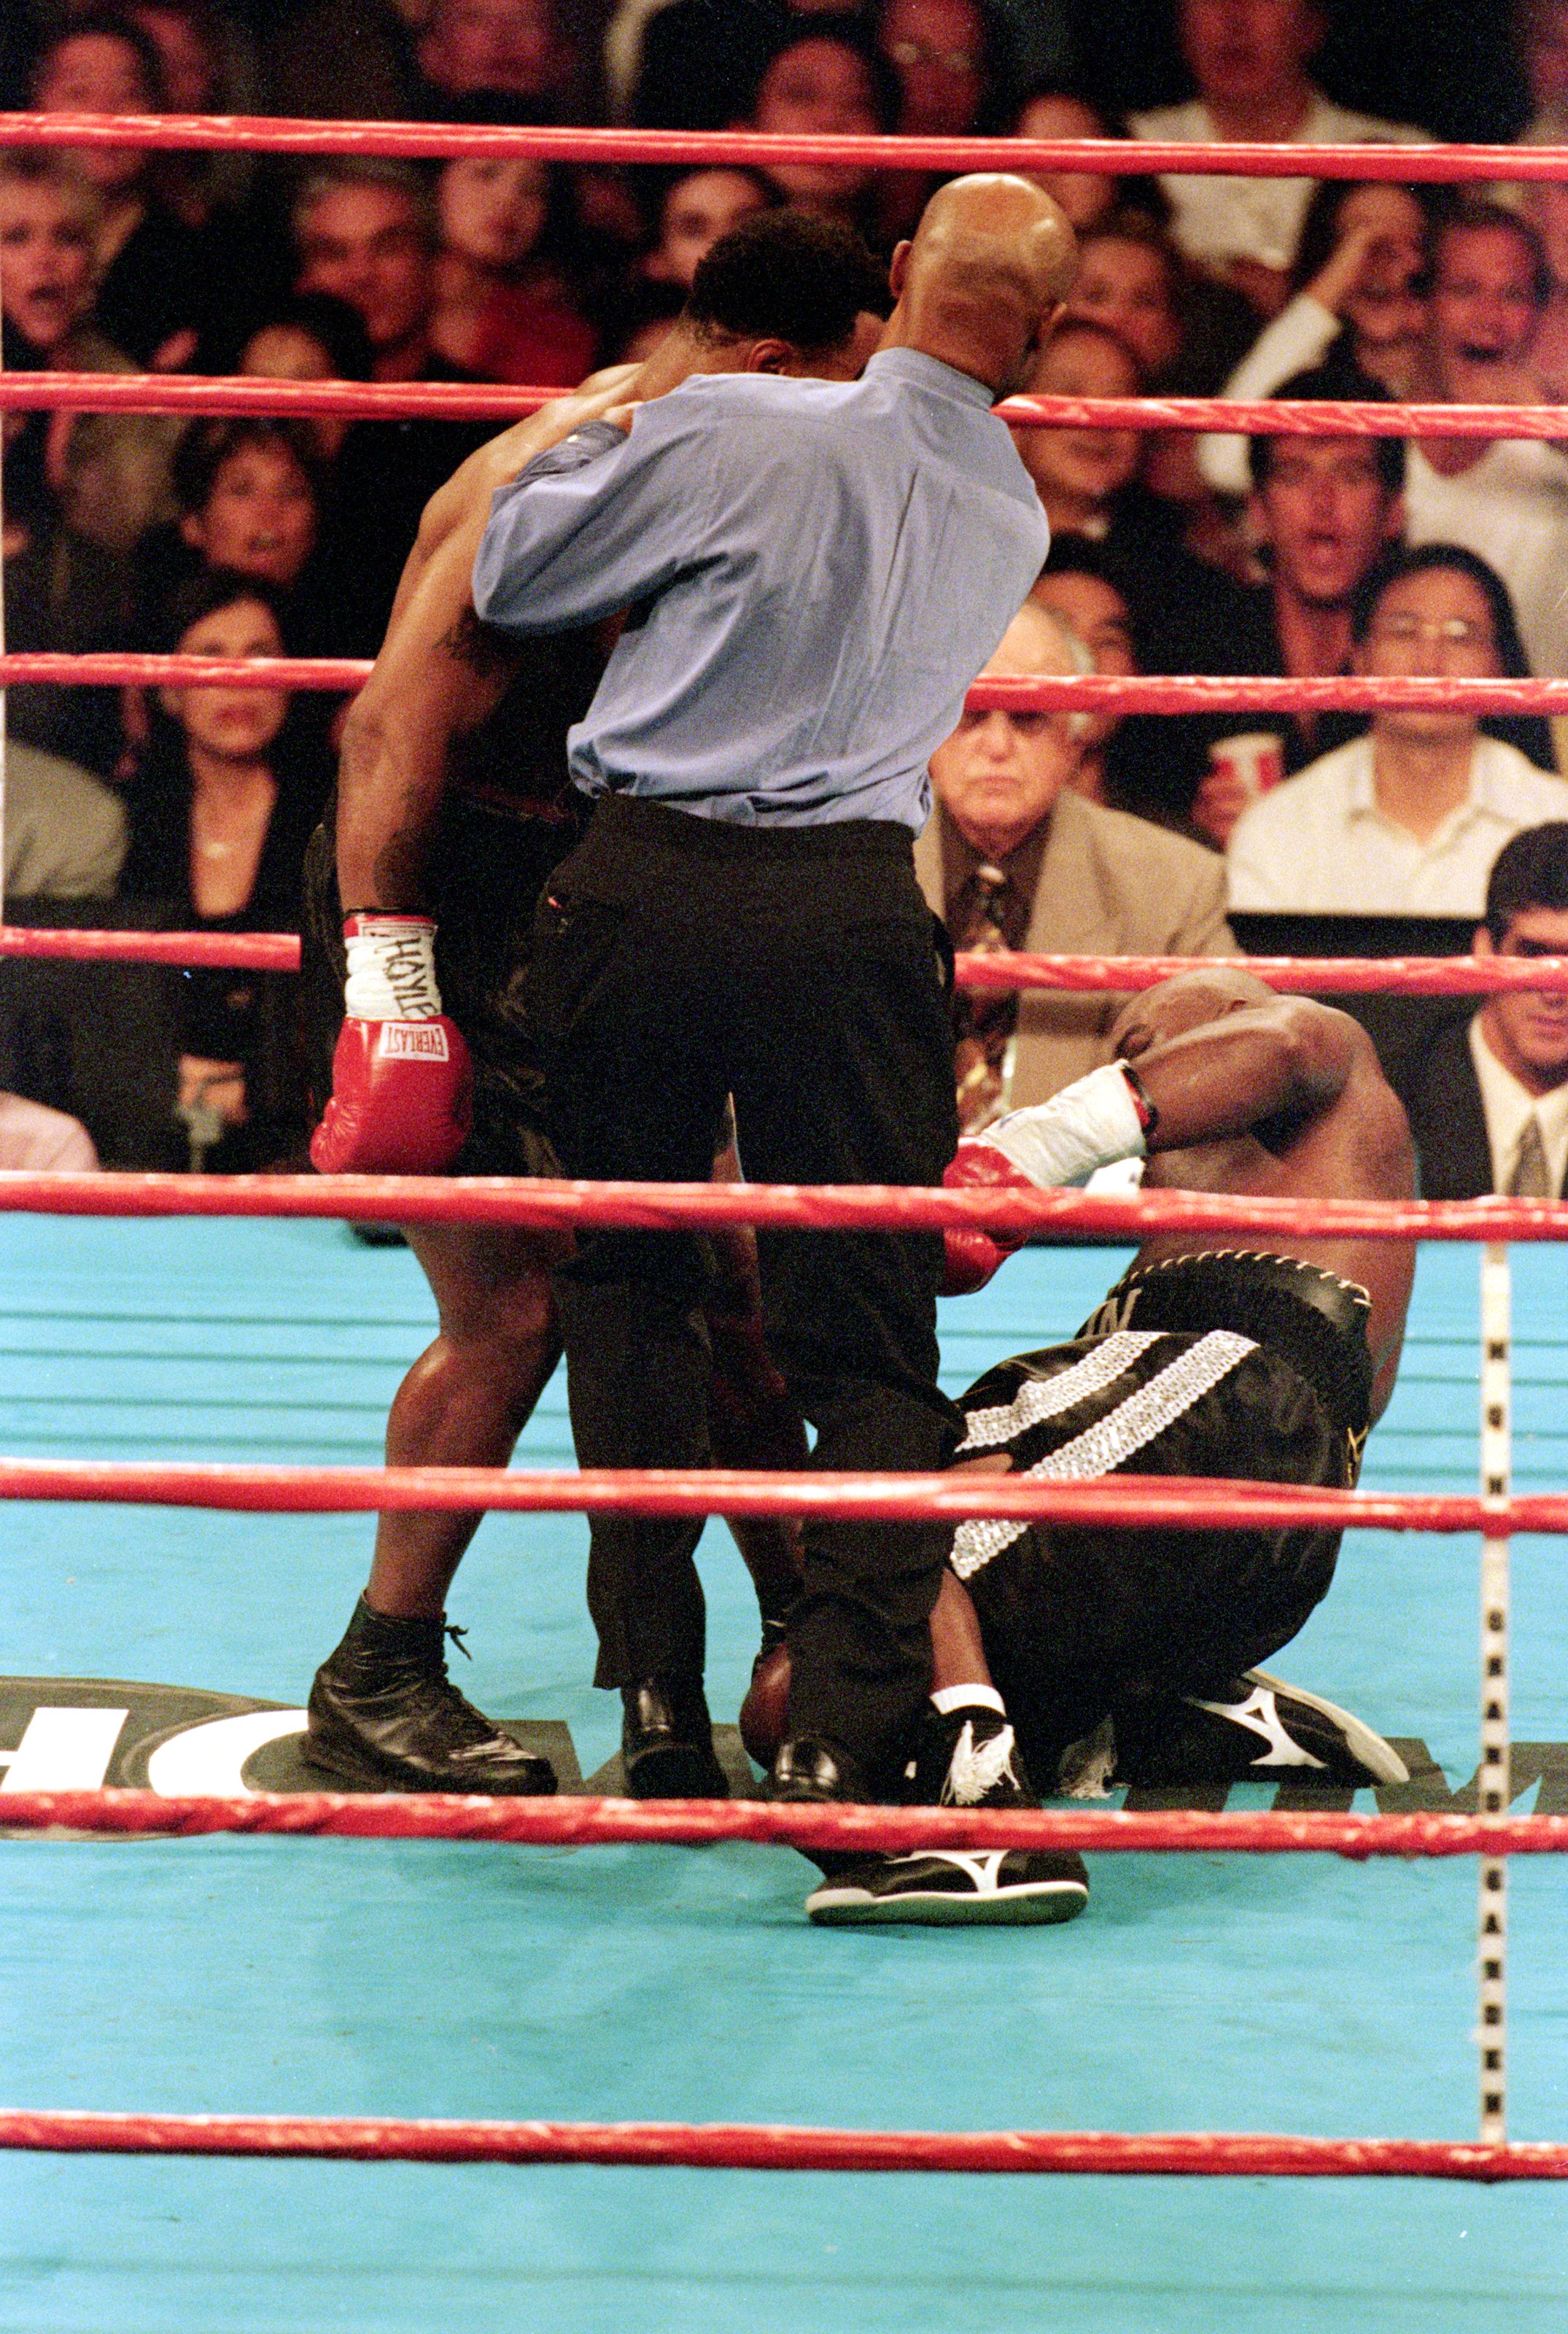 23 Oct 1999: Mike Tyson knocks down Orlin Norris after the bell during the fight at the MGM Grand Hotel in Las Vegas, Nevada. The fight ended in a no contest.